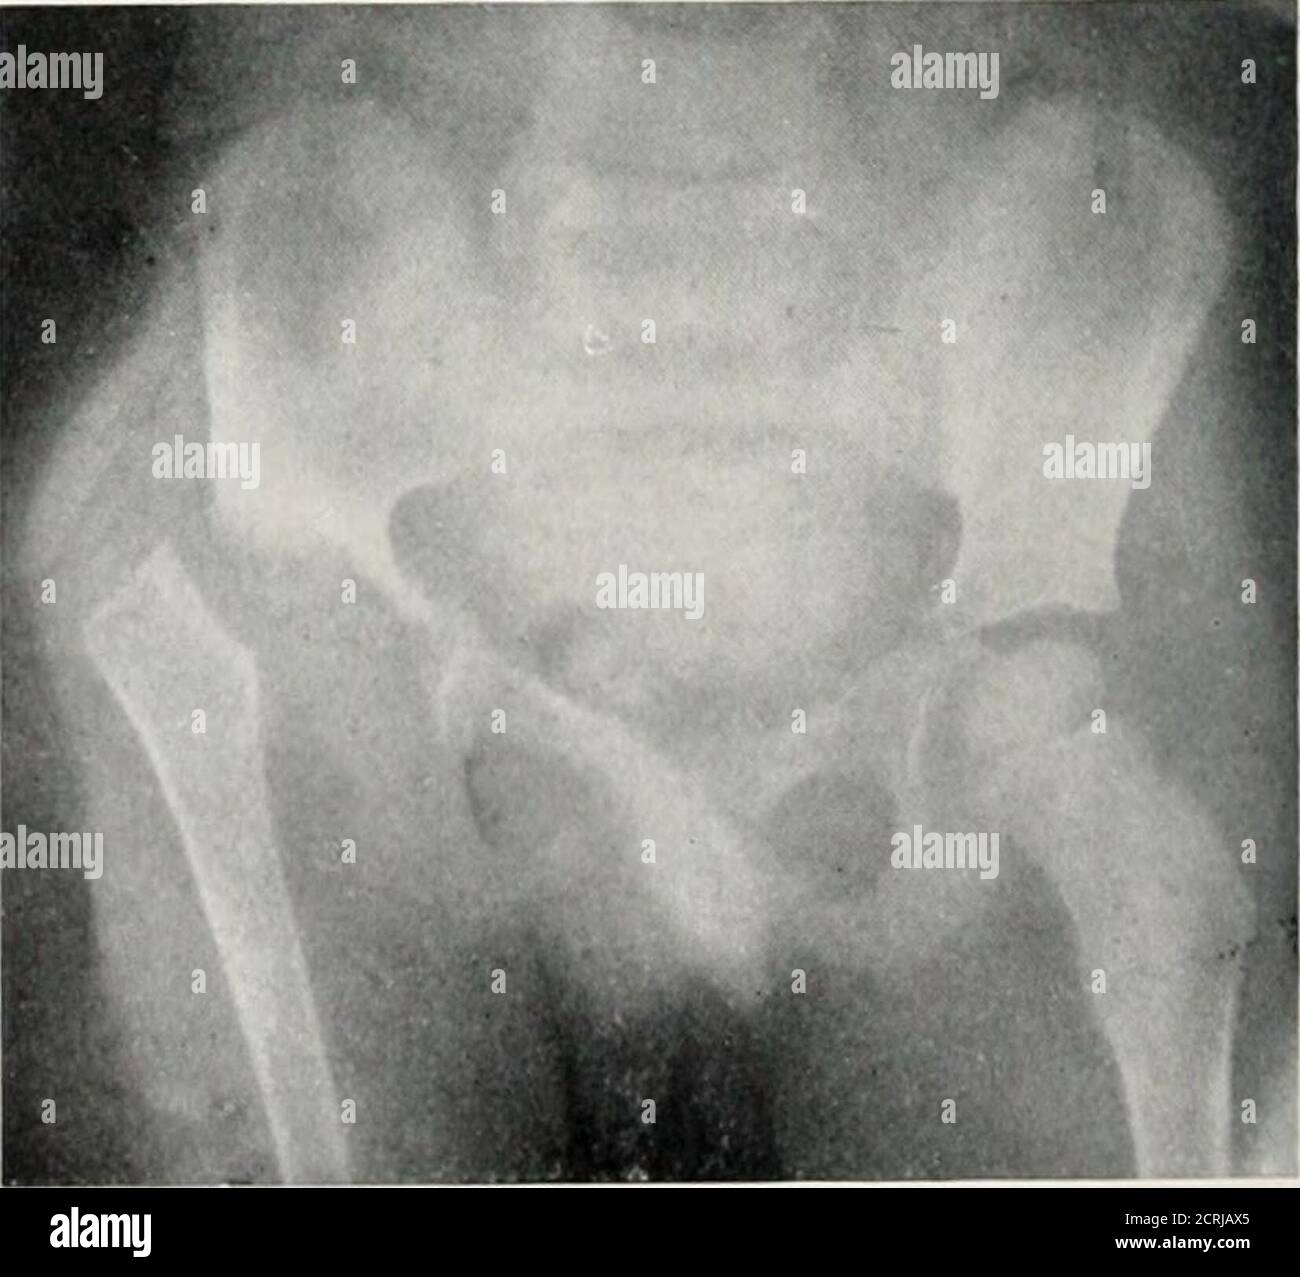 . Radiography, X-ray therapeutics and radium therapy . PLATE WII.—Injuries and Disease of Pelvis and Hip-joint. a, Fracture of pelvis in a child ; the injury lias occurred a1 both puhic bones, and on one sidethrough the ischium. b, Fracture of neck of femur, impaction into great trochanter. c, Displacement of ripper end of femur in a child. The acetabulum is eroded and the head of femursent. This is probably the result of tuberculosis. The appearances are similar to those of con- gi nii.ll dislocation. DISEASES OF BONE All varieties of bone disease are met with in the radiographic examinationo Stock Photo